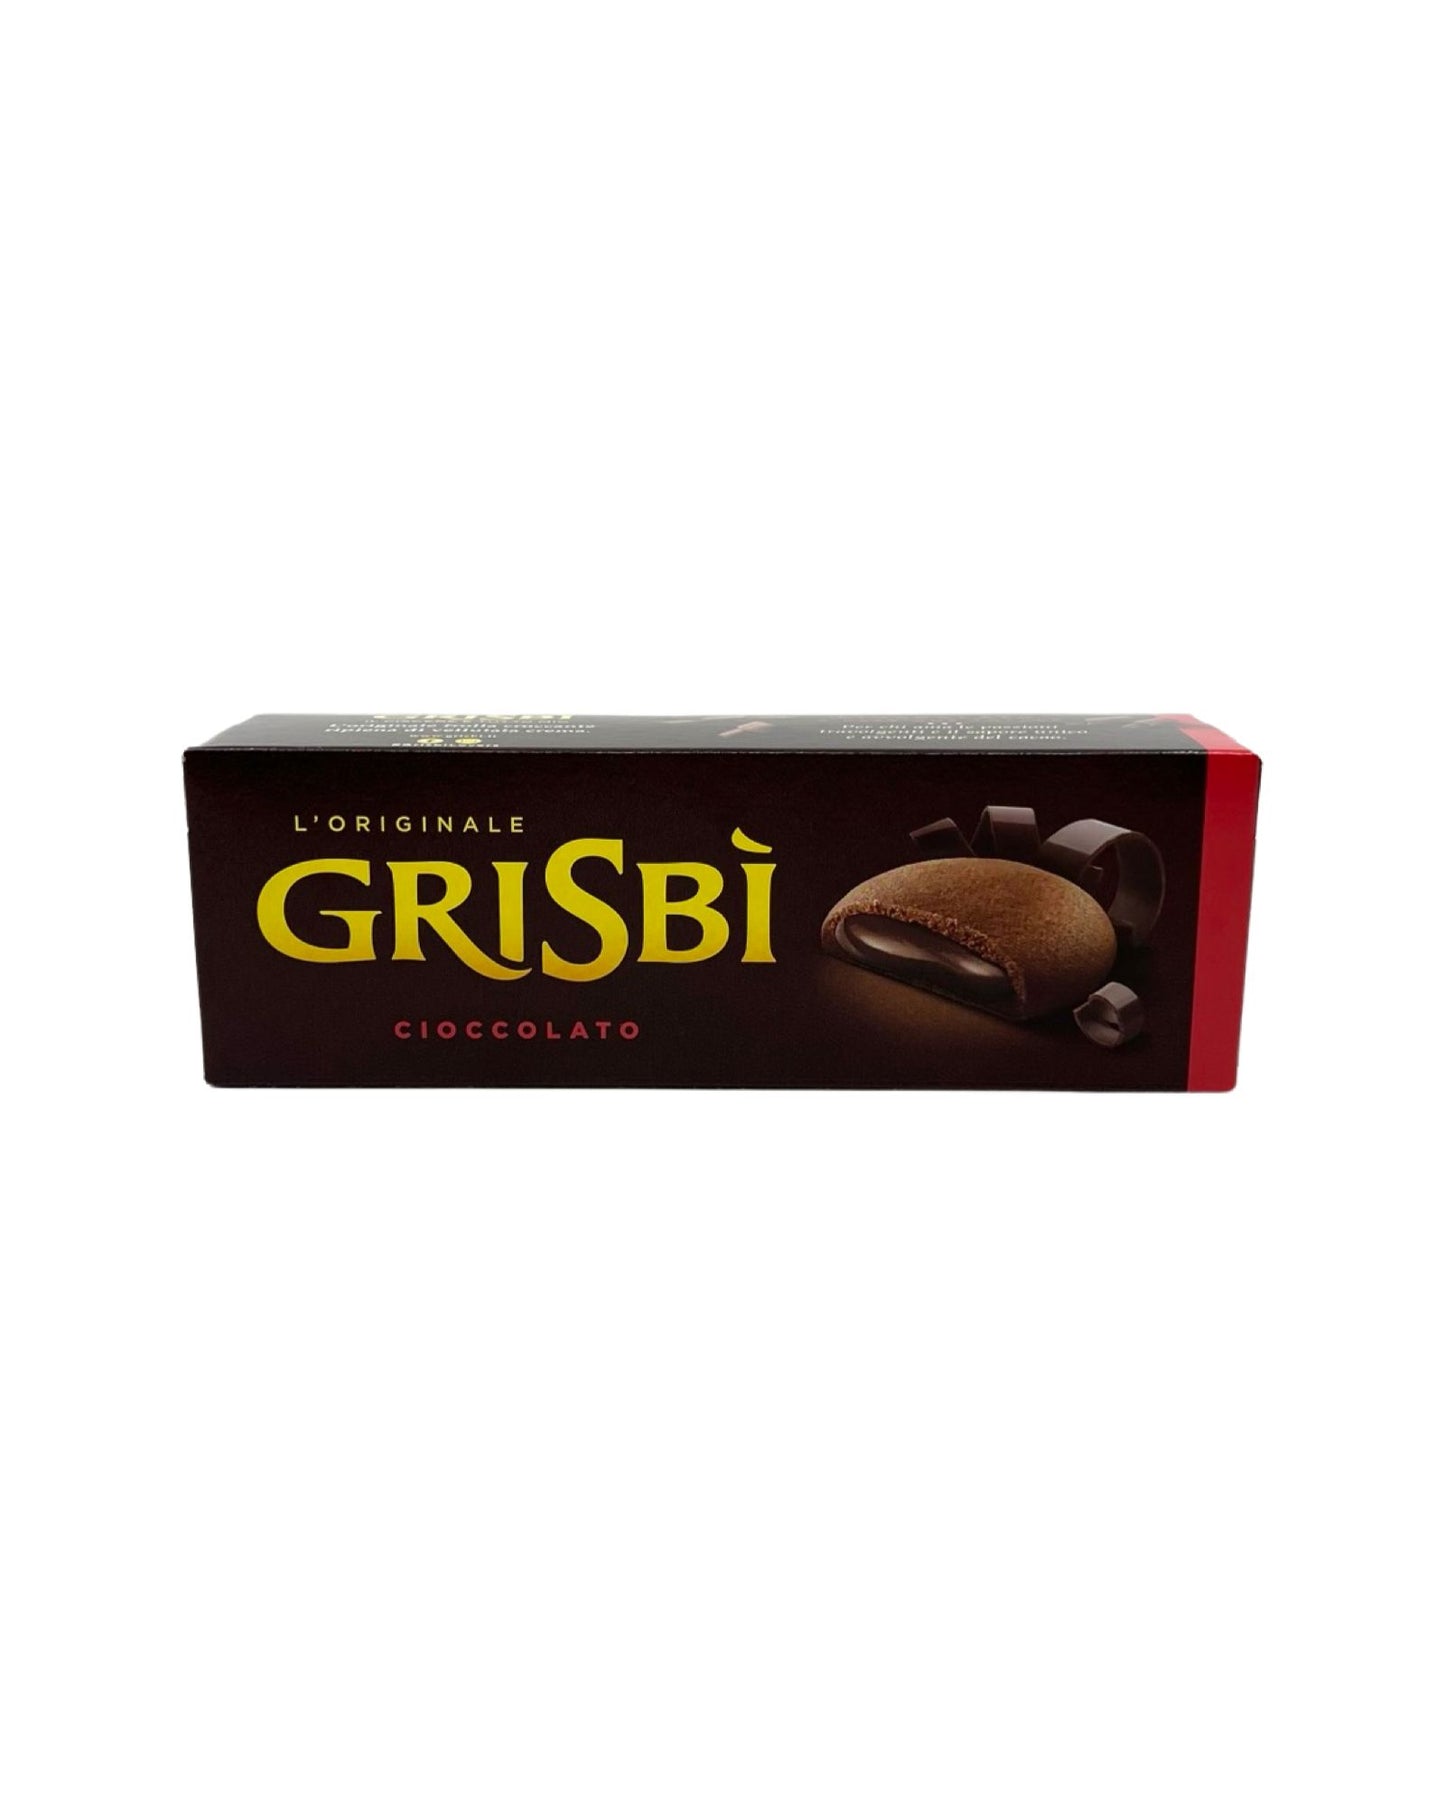 Biscuits filled w/chocolate cream (150g)